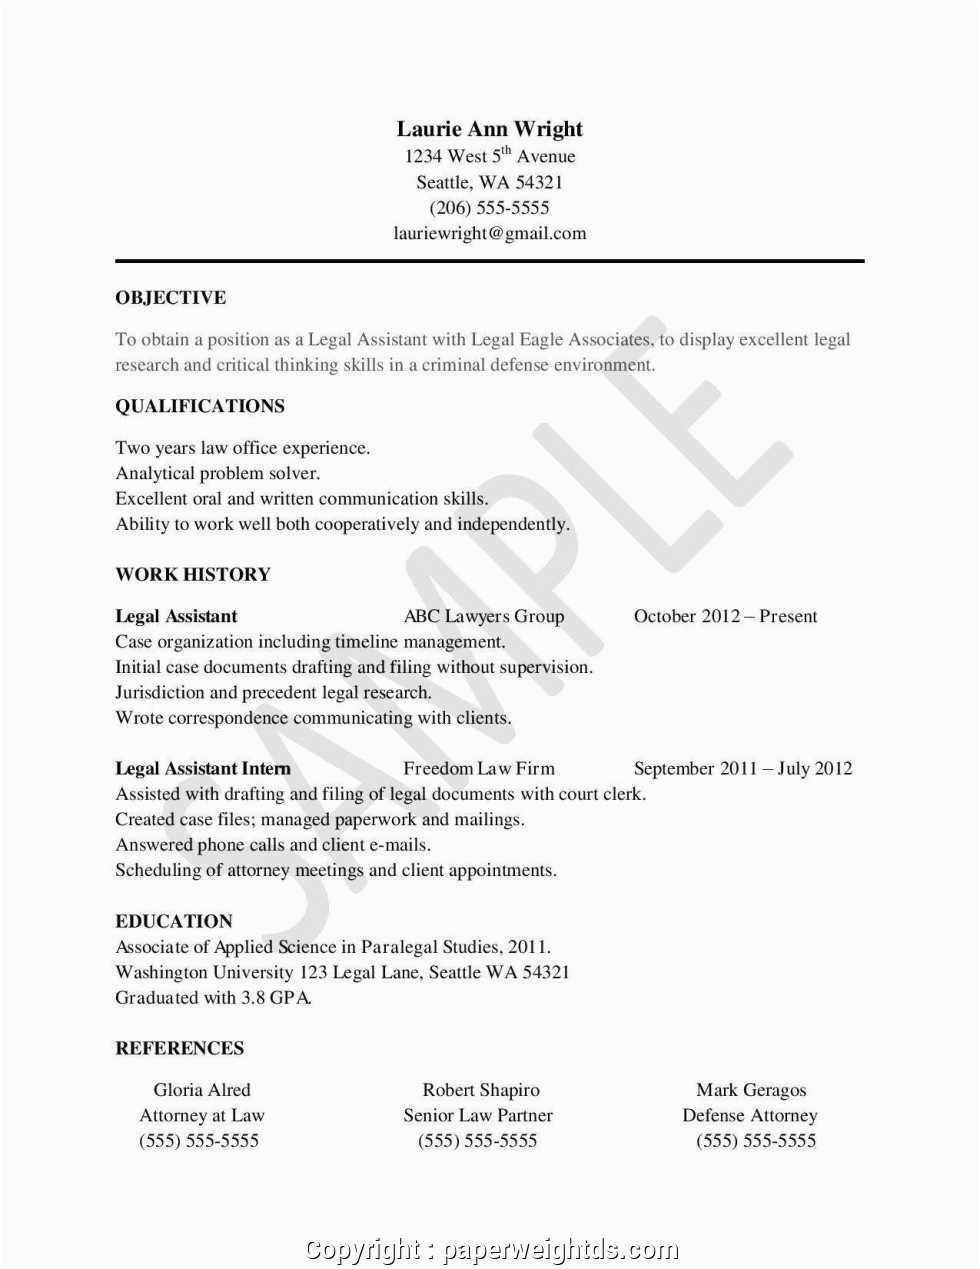 Sample Resume for Sales Clerk without Experience New Case Manager Resume No Experience Sample Resume